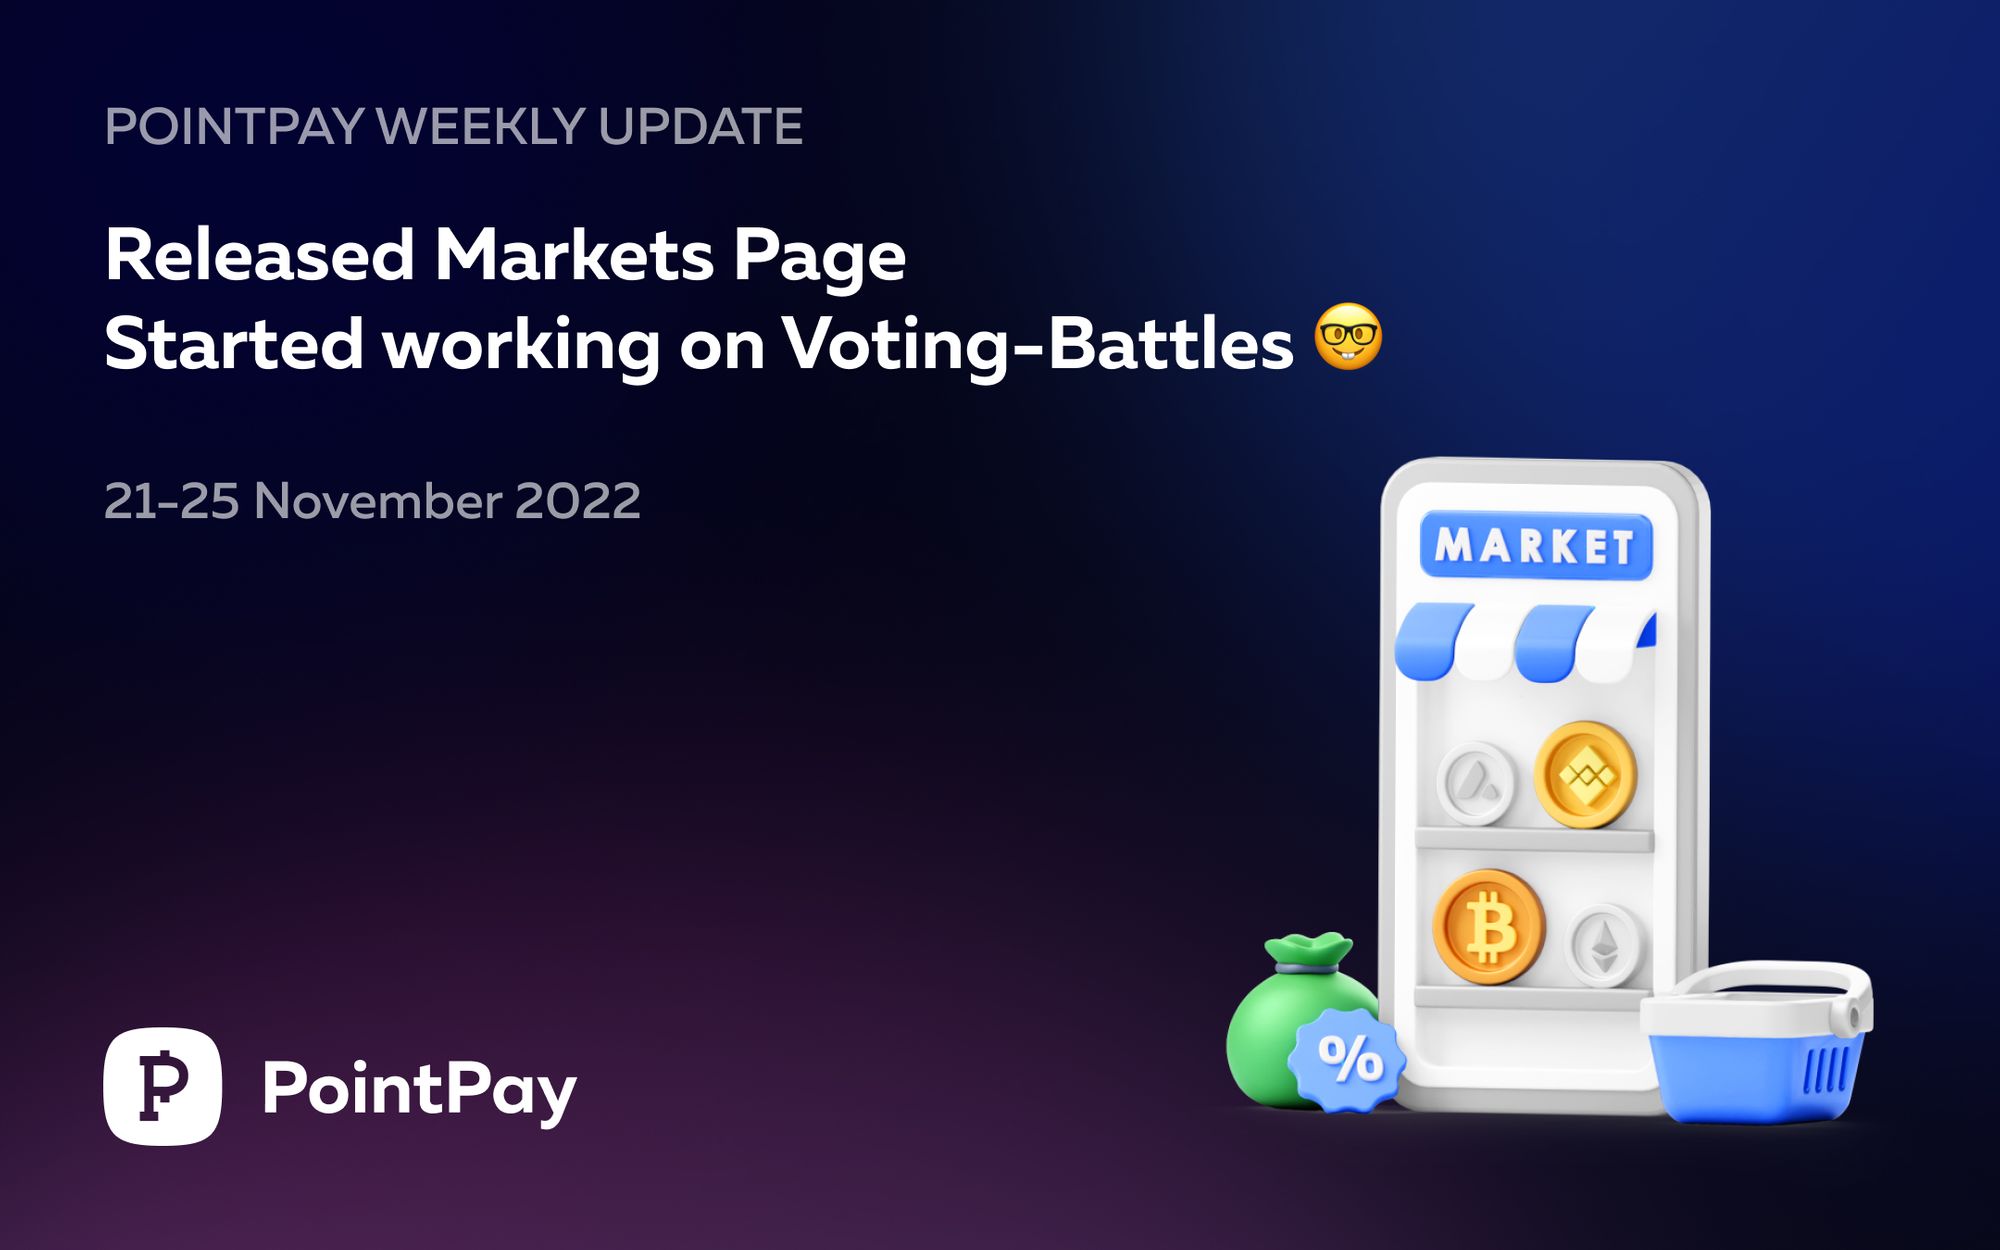 PointPay Weekly Update (21 - 25 November 2022)